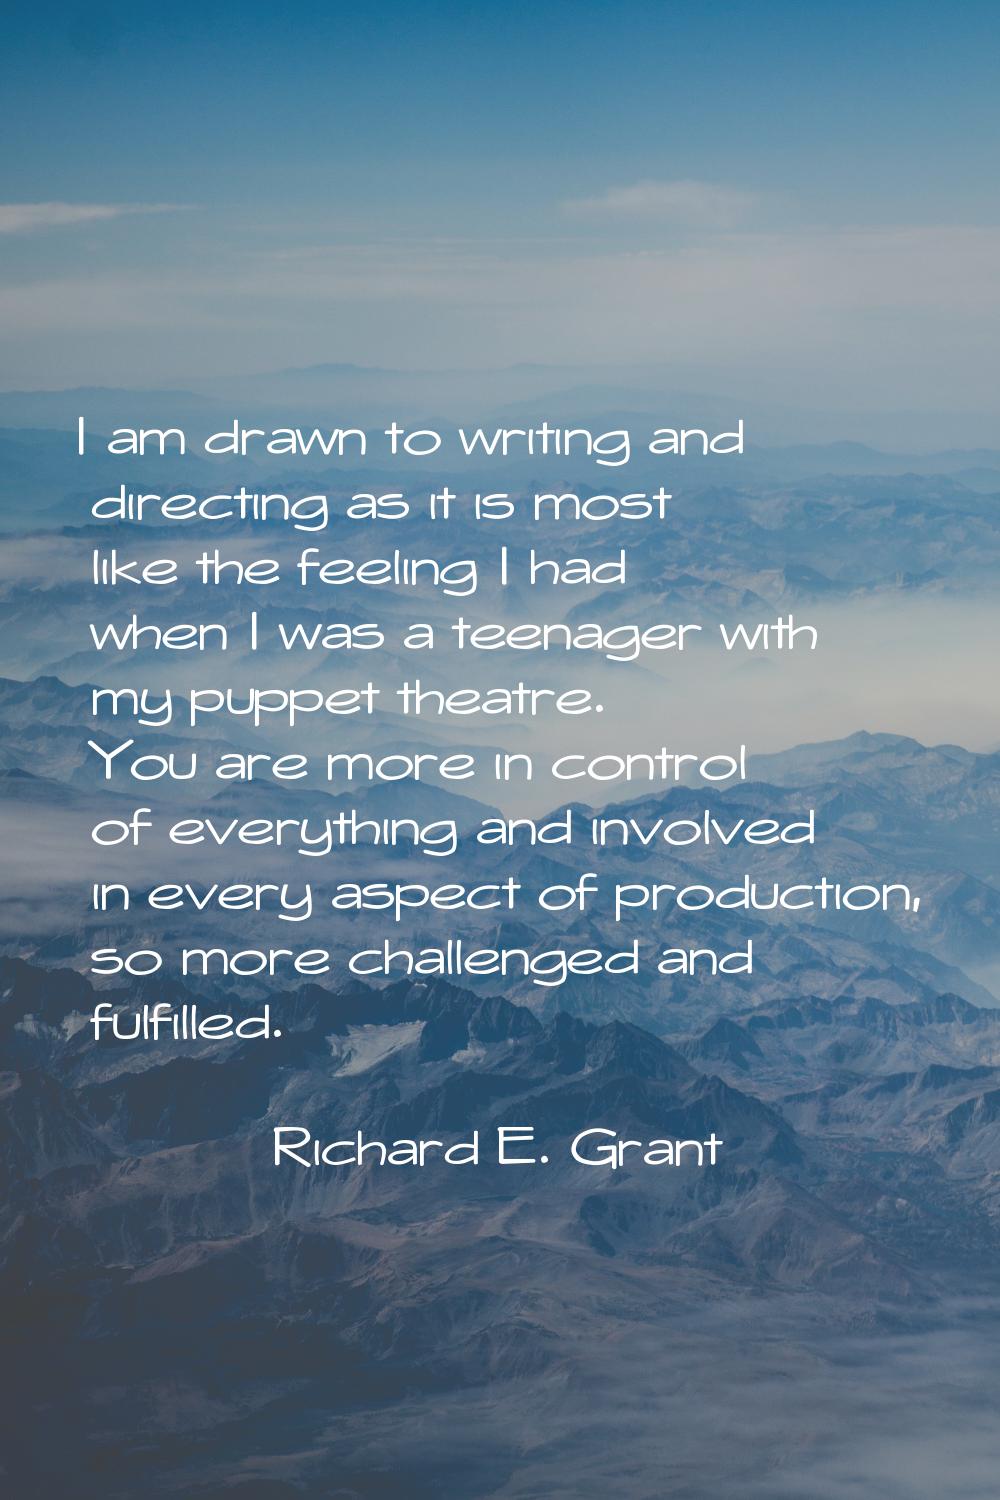 I am drawn to writing and directing as it is most like the feeling I had when I was a teenager with